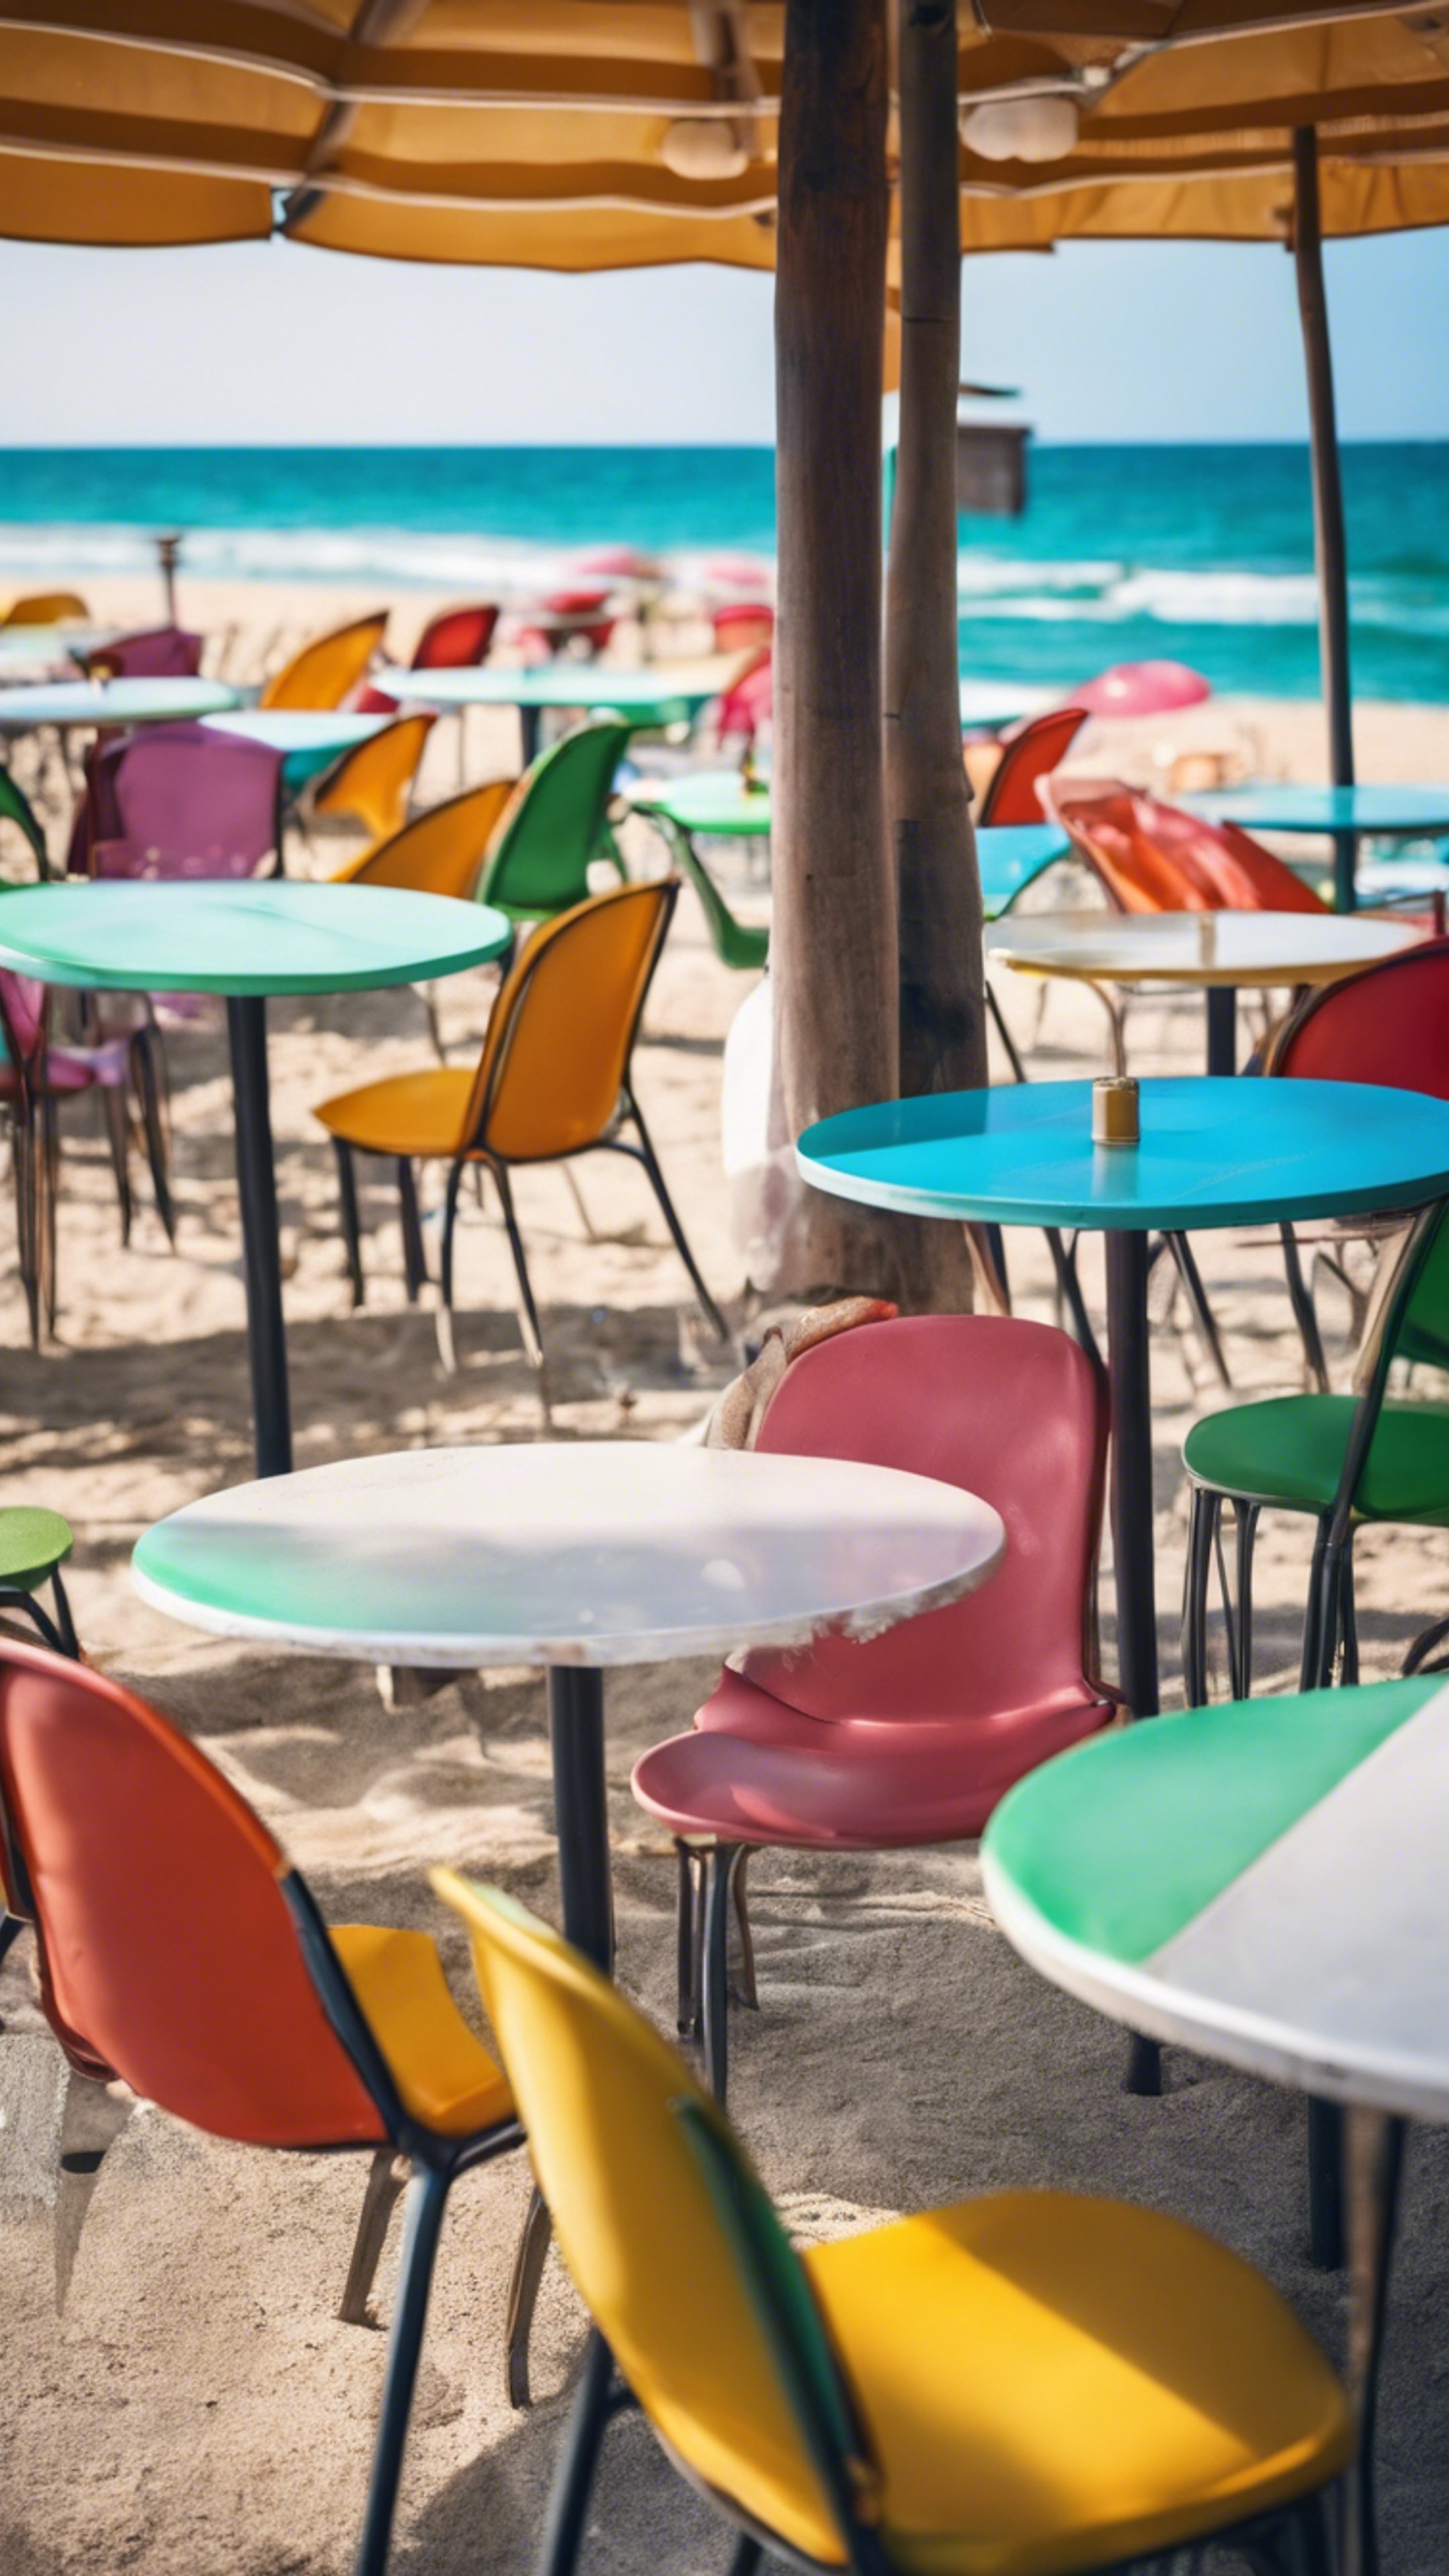 A beach side cafe with colorful chairs, umbrellas, and a panoramic view of the ocean. Обои[e8a344cbd52d49a3867e]